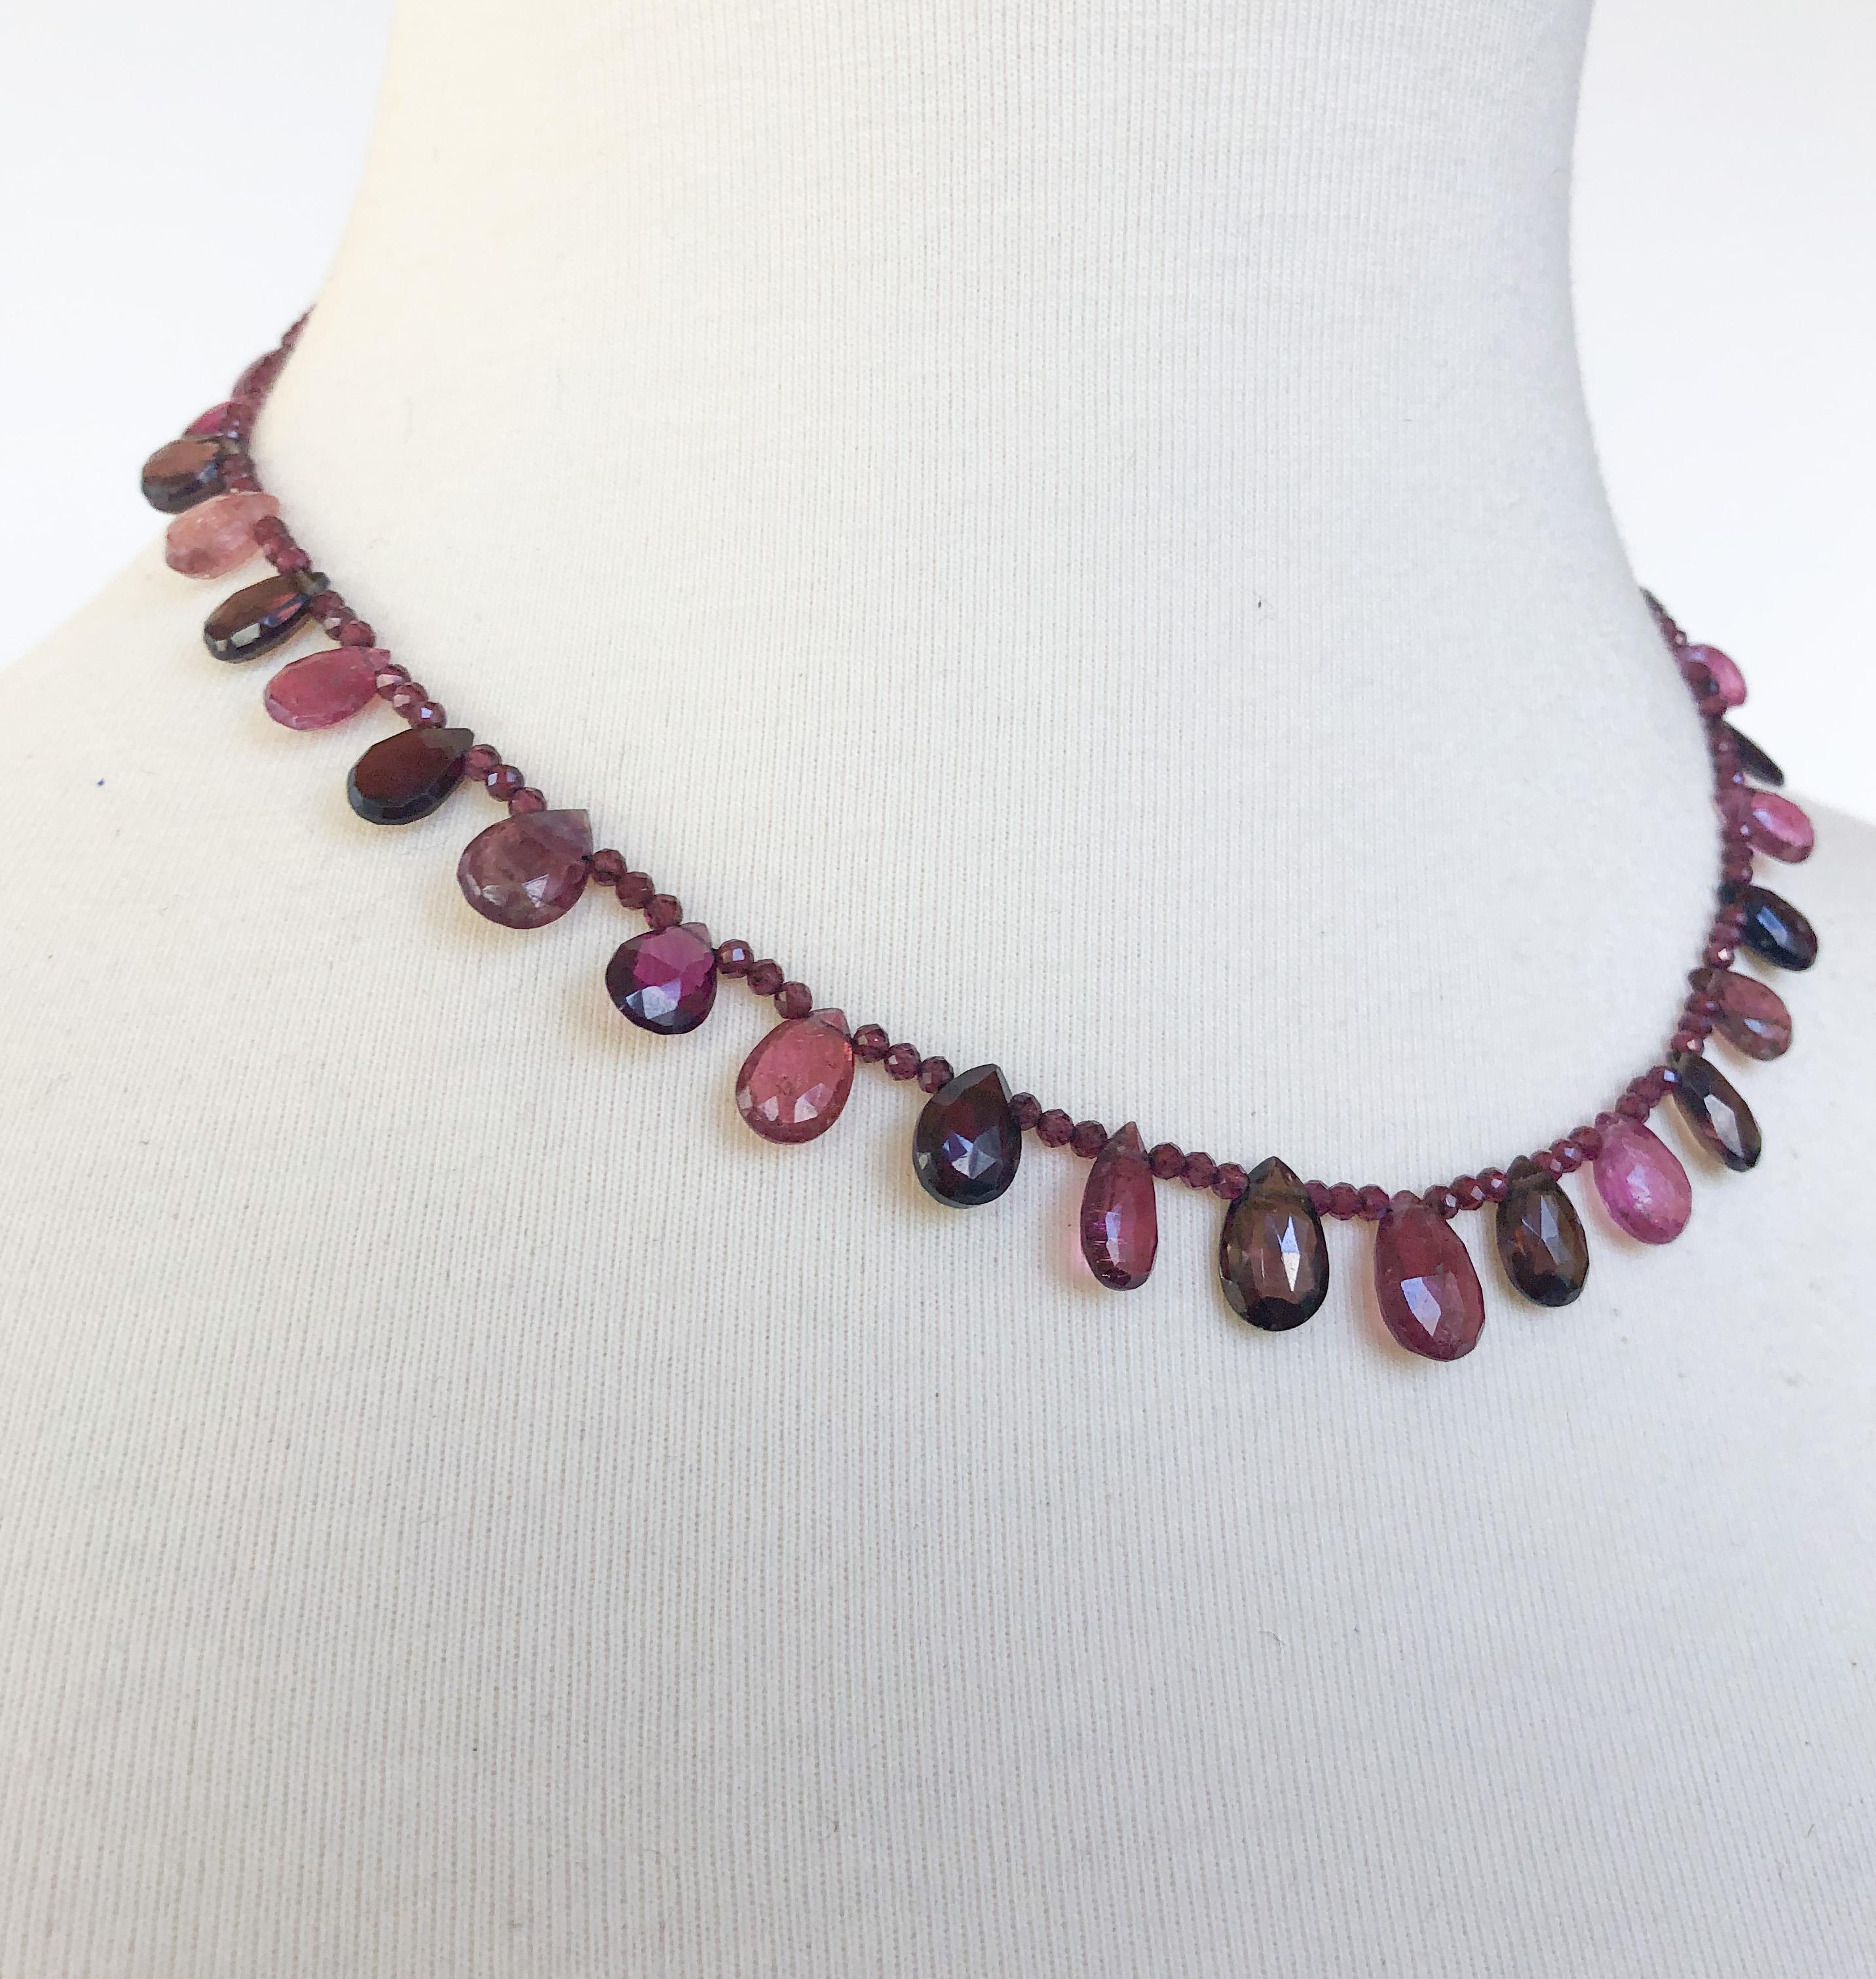 This minimalist necklace is made with garnet and multi colored pink tourmaline briolettes. The lobster clasp is silver gold plated, and very secure. The necklace is 15.5 inches long, but can be made longer at your request. 